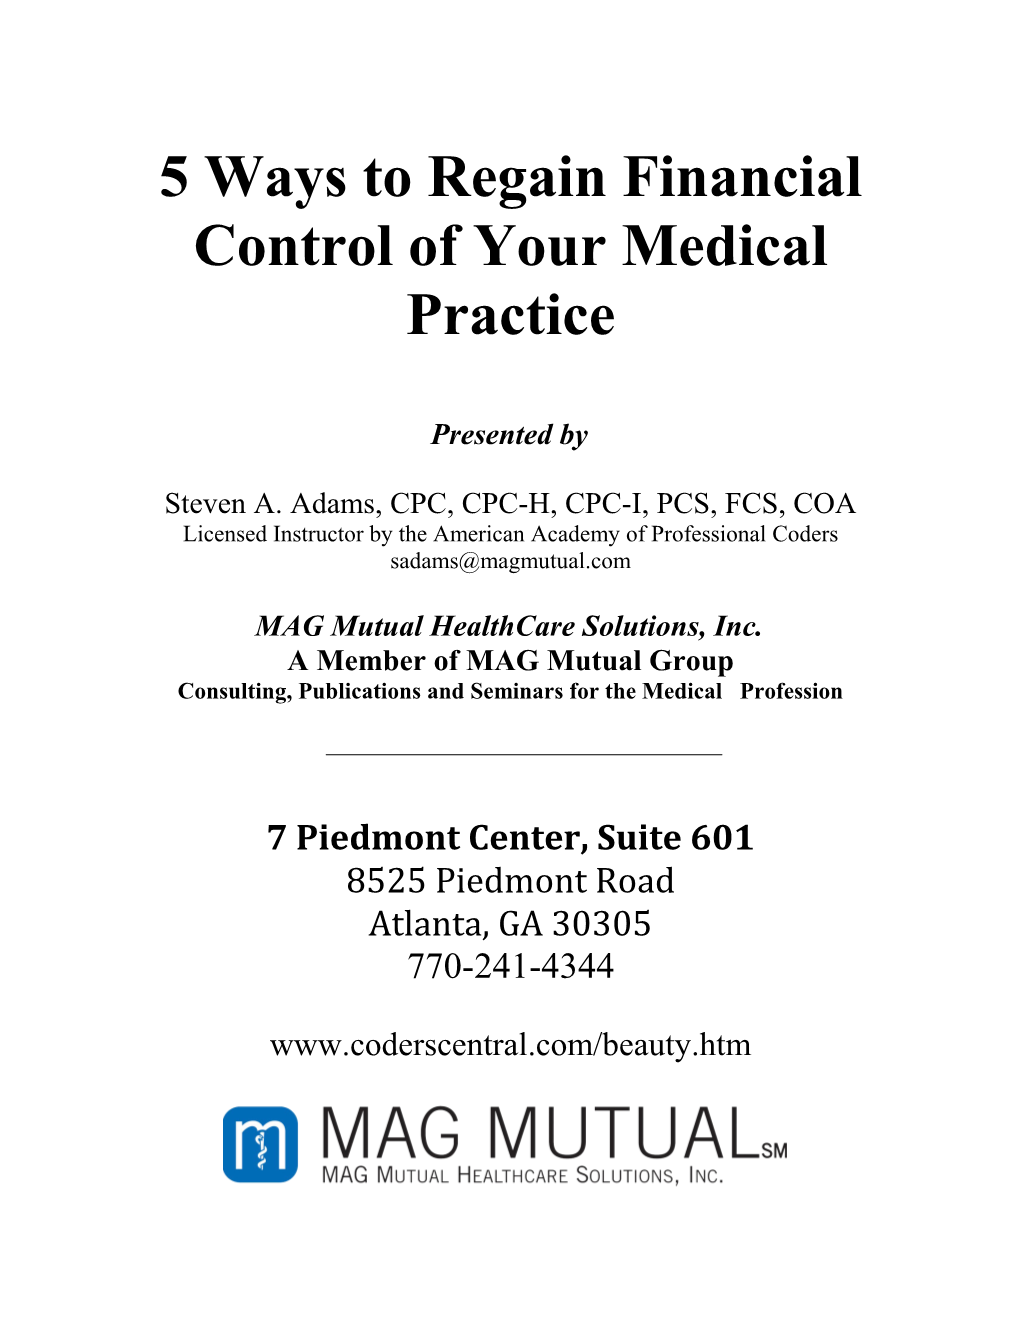 5 Ways to Regain Financial Control of Your Medical Practice